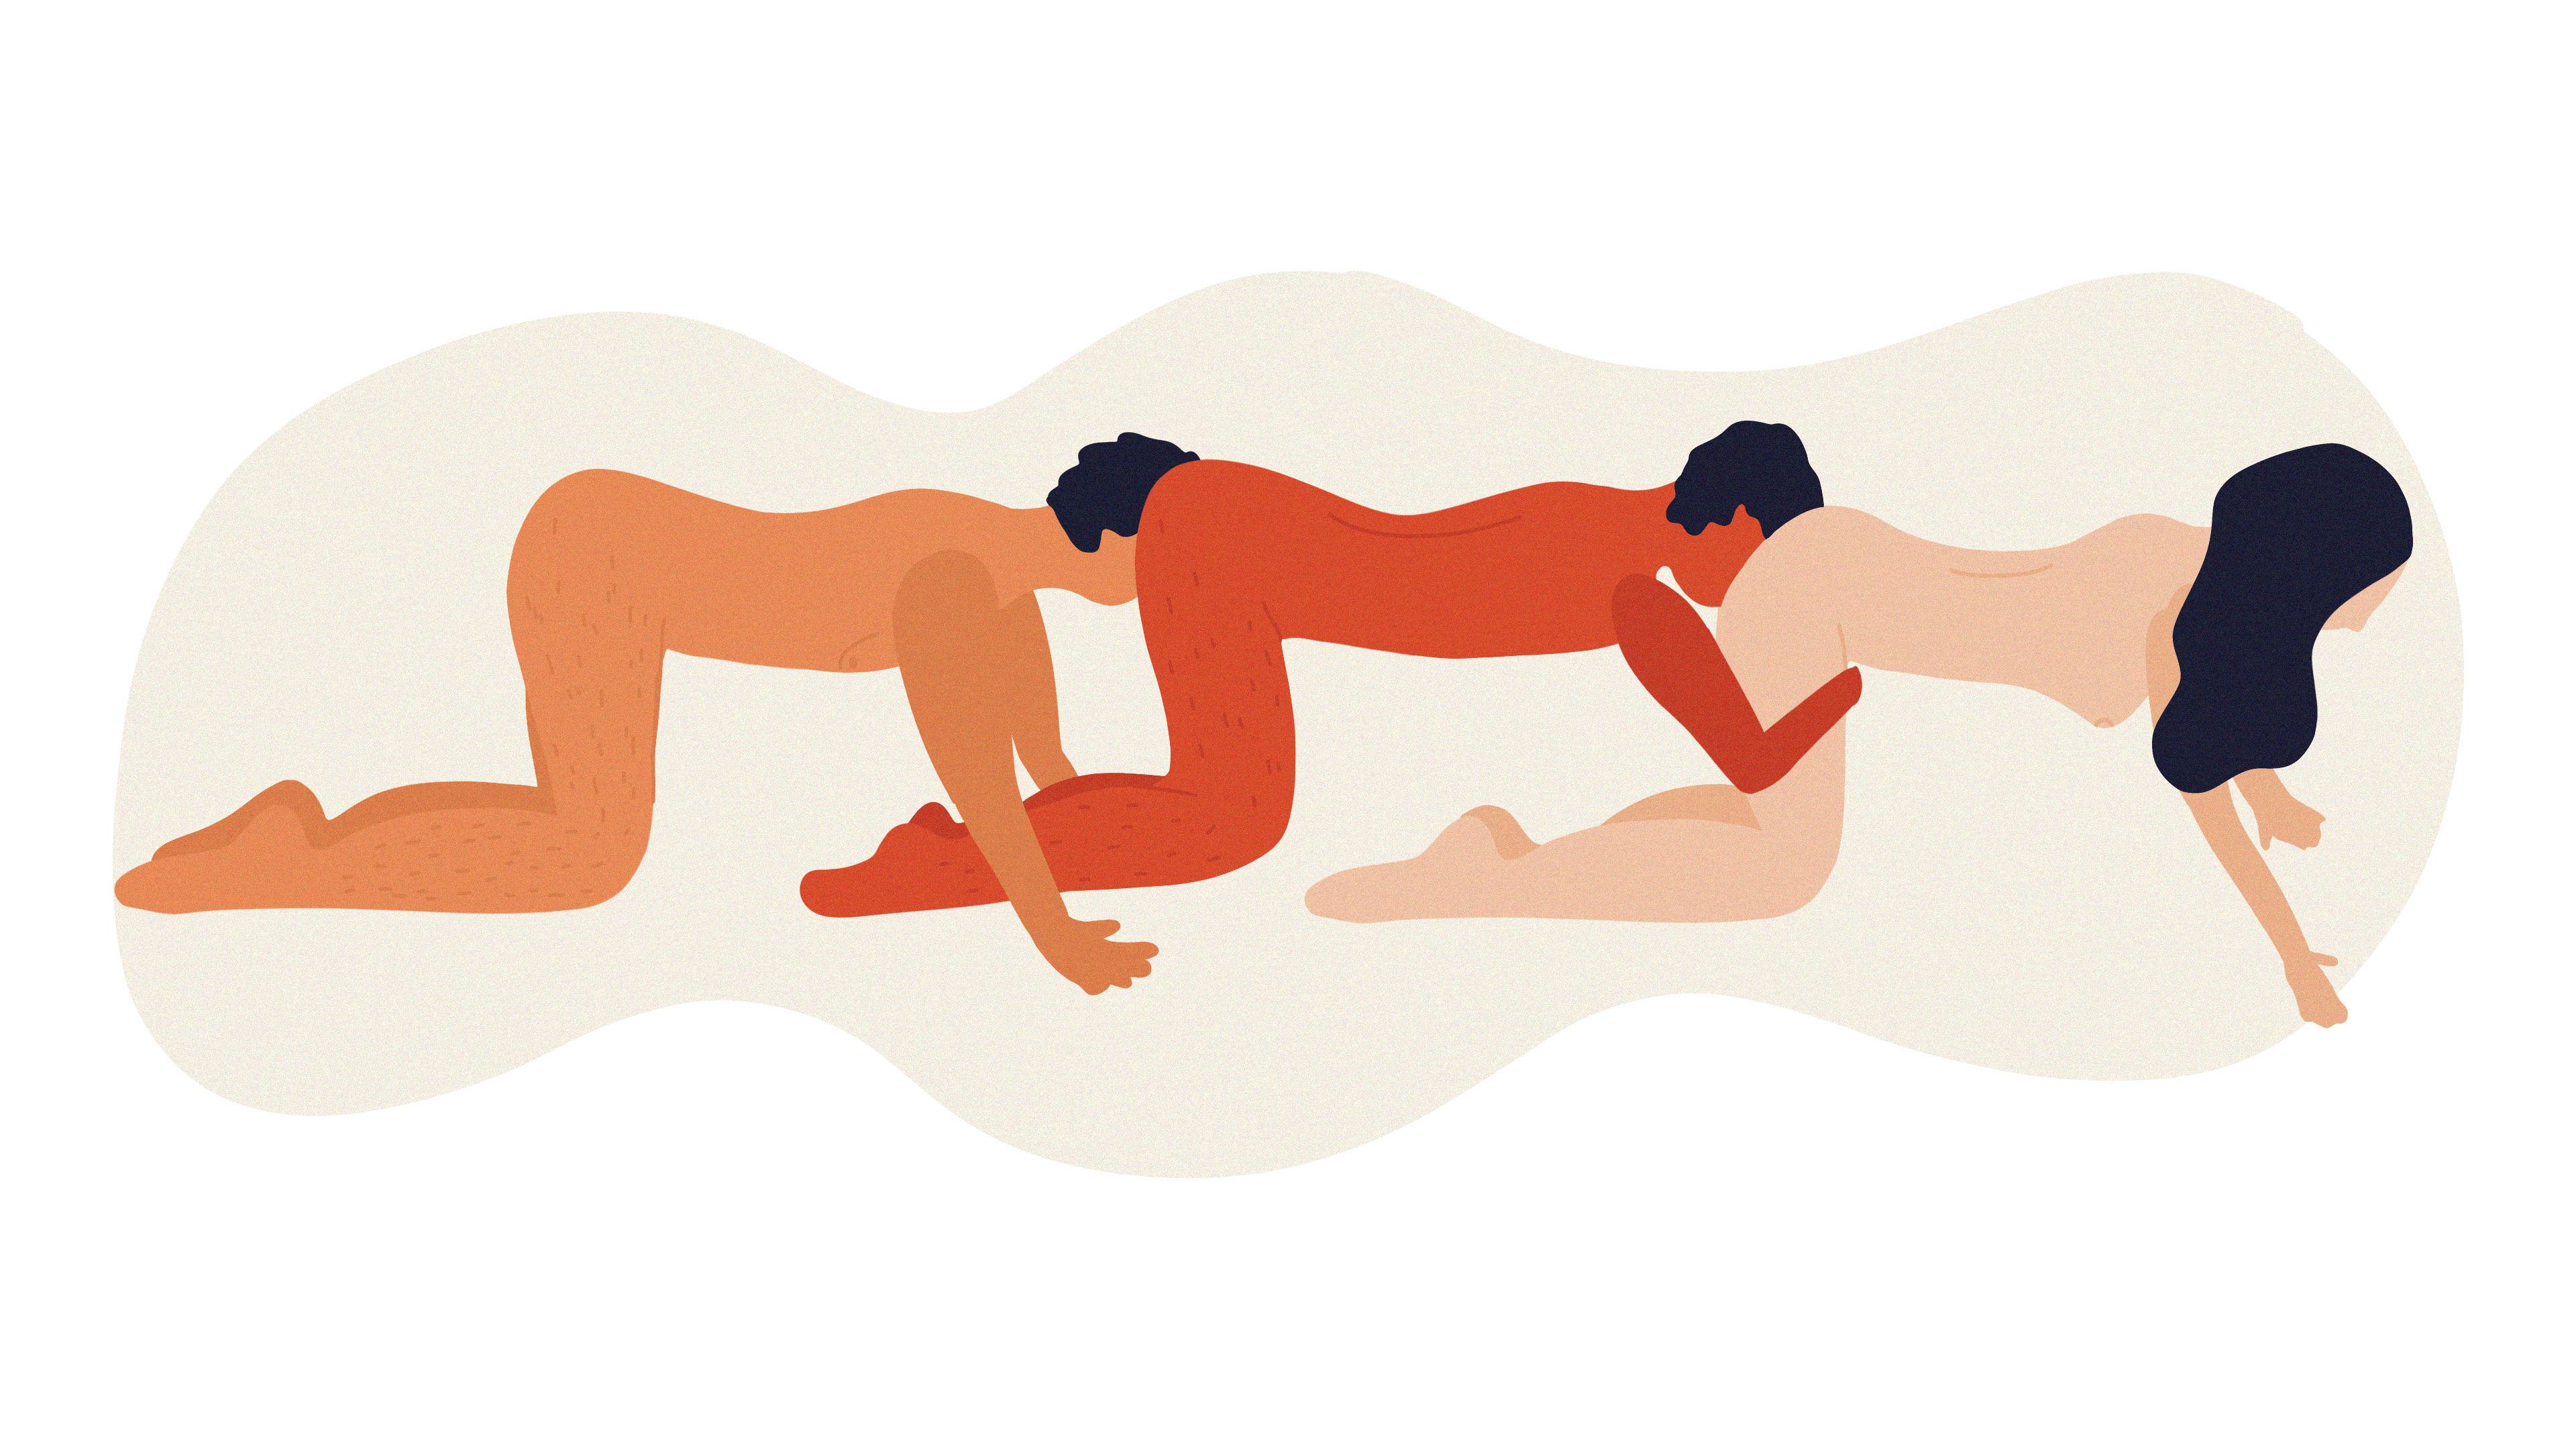 10 Threesome Sex Positions That Are Super Hot and Totally Doable